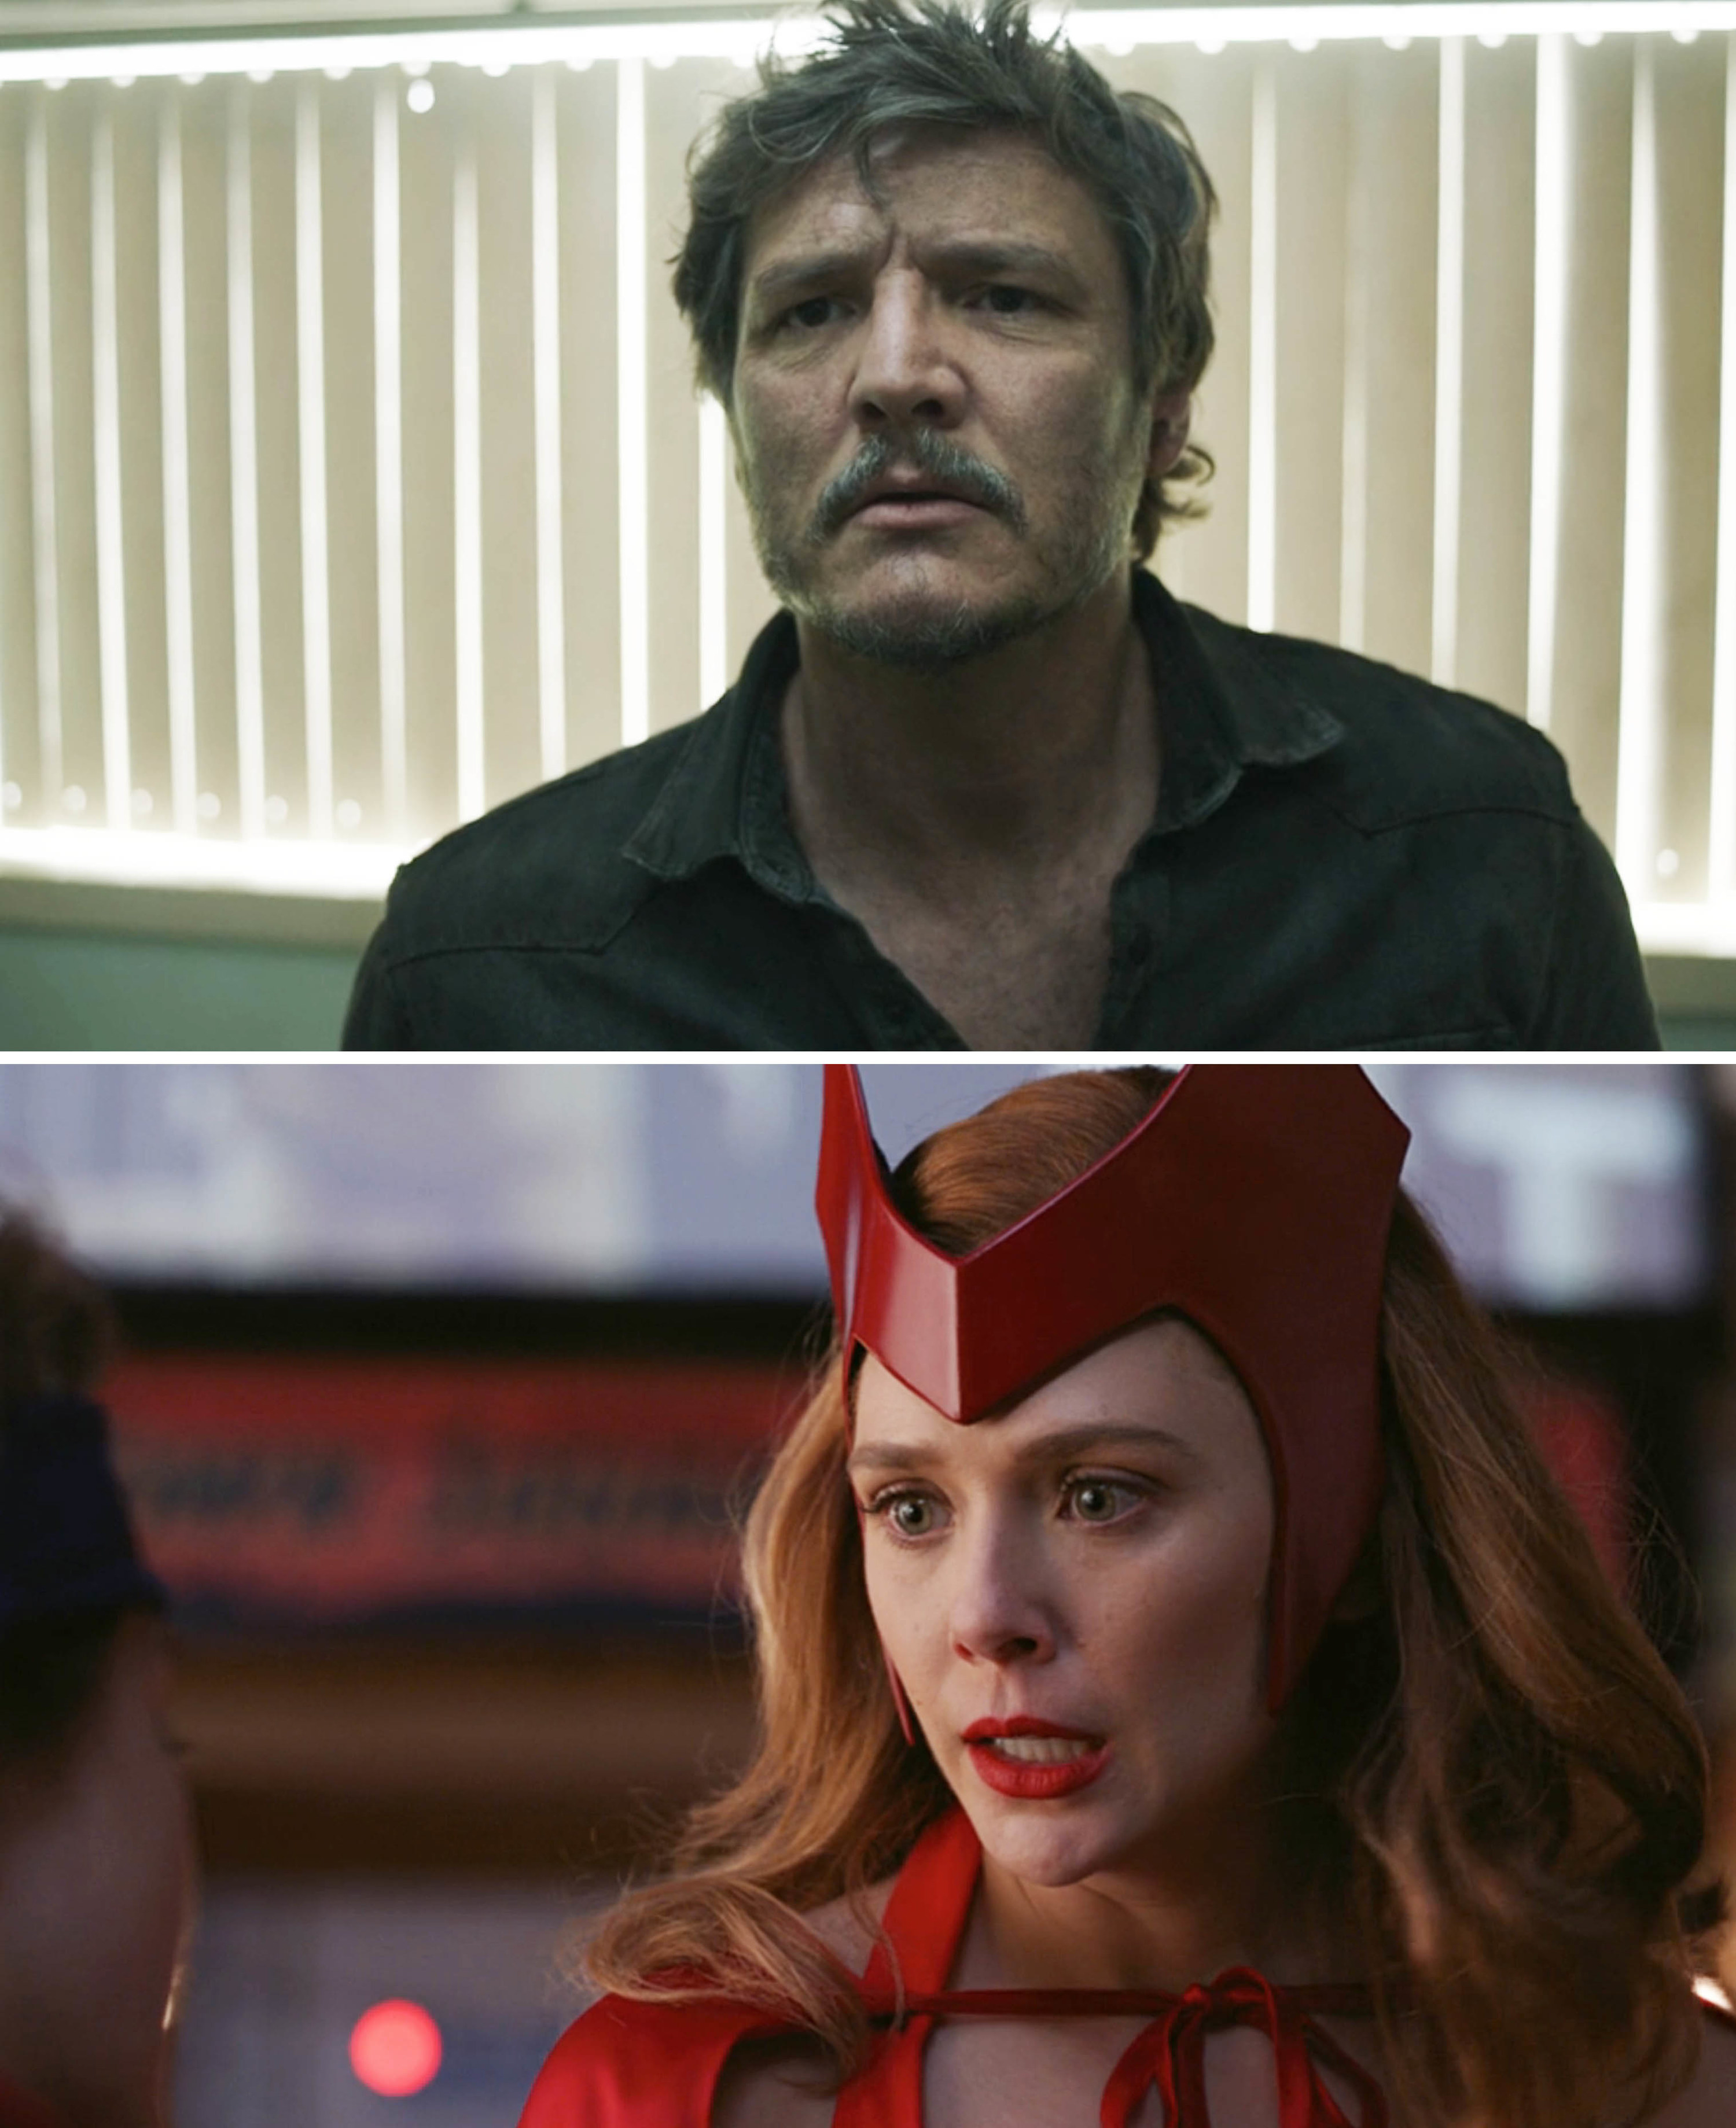 On top, Pedro as Joel in The Last of Us and Elizabeth as The Scarlet Witch in WandaVision in the bottom photo